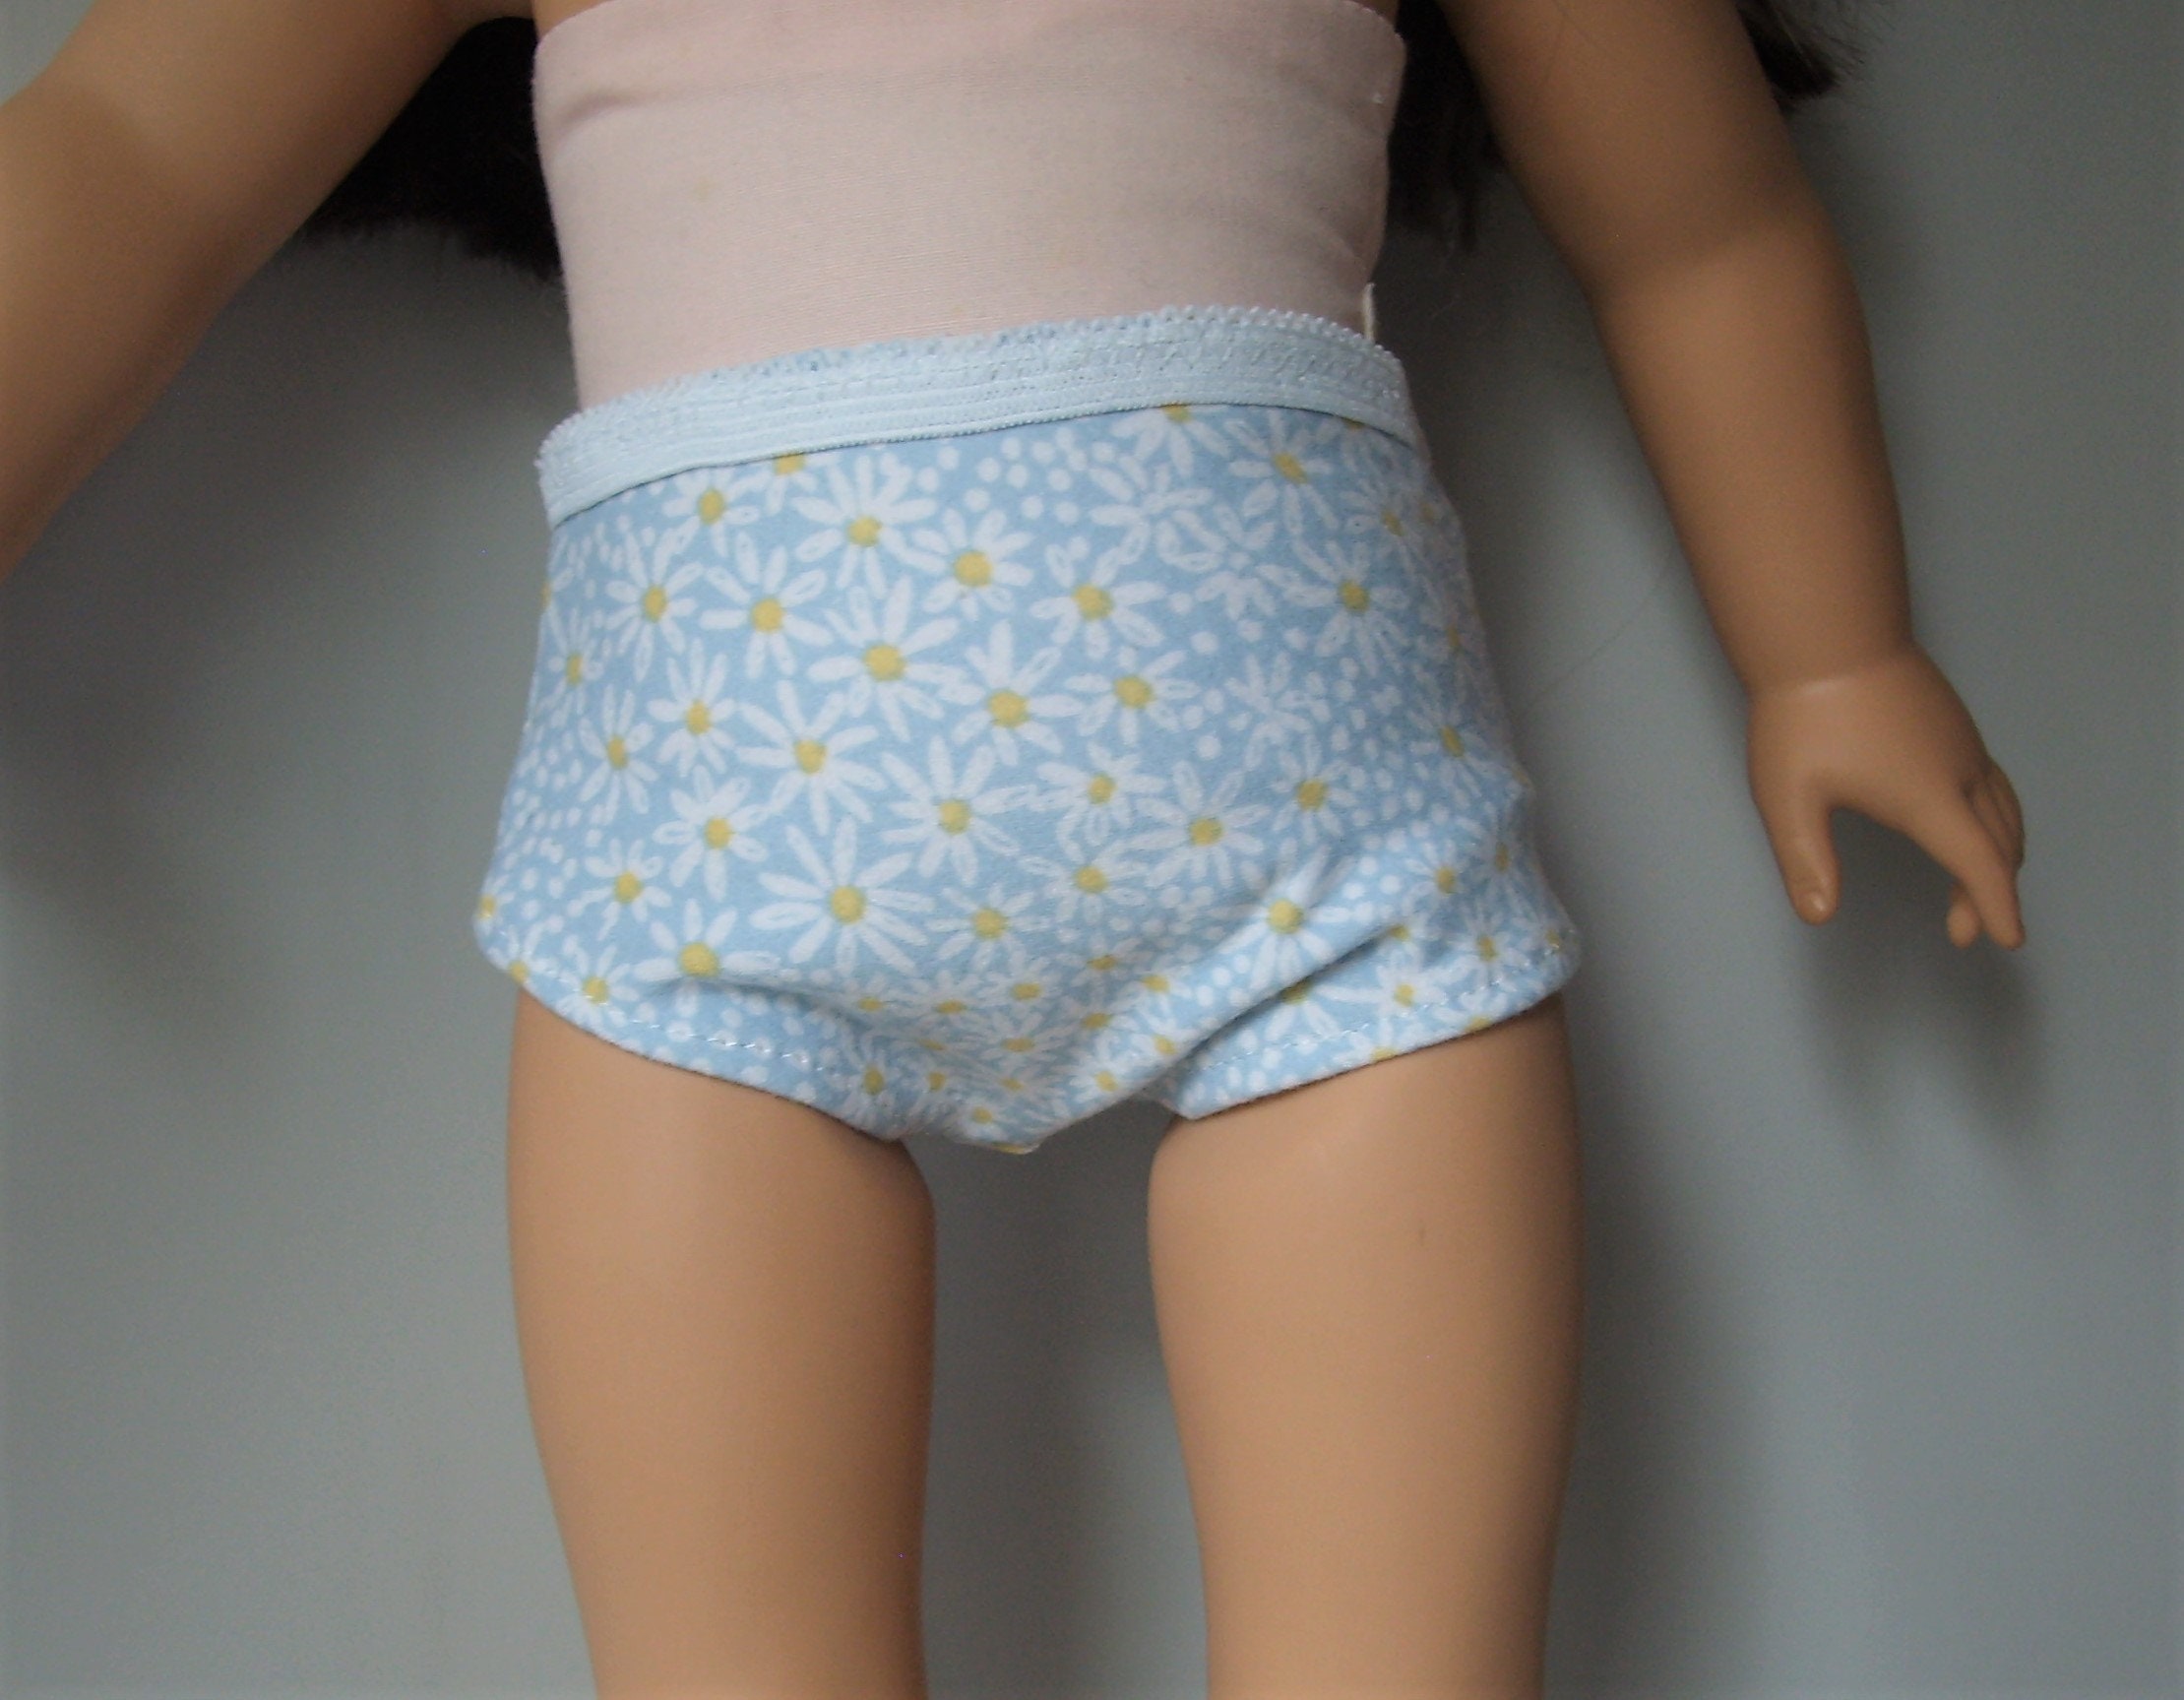 American Girl Doll Panties, Fits Any 18 Doll, All 3 Panties/underwear for  Your American Girl Doll -  Canada